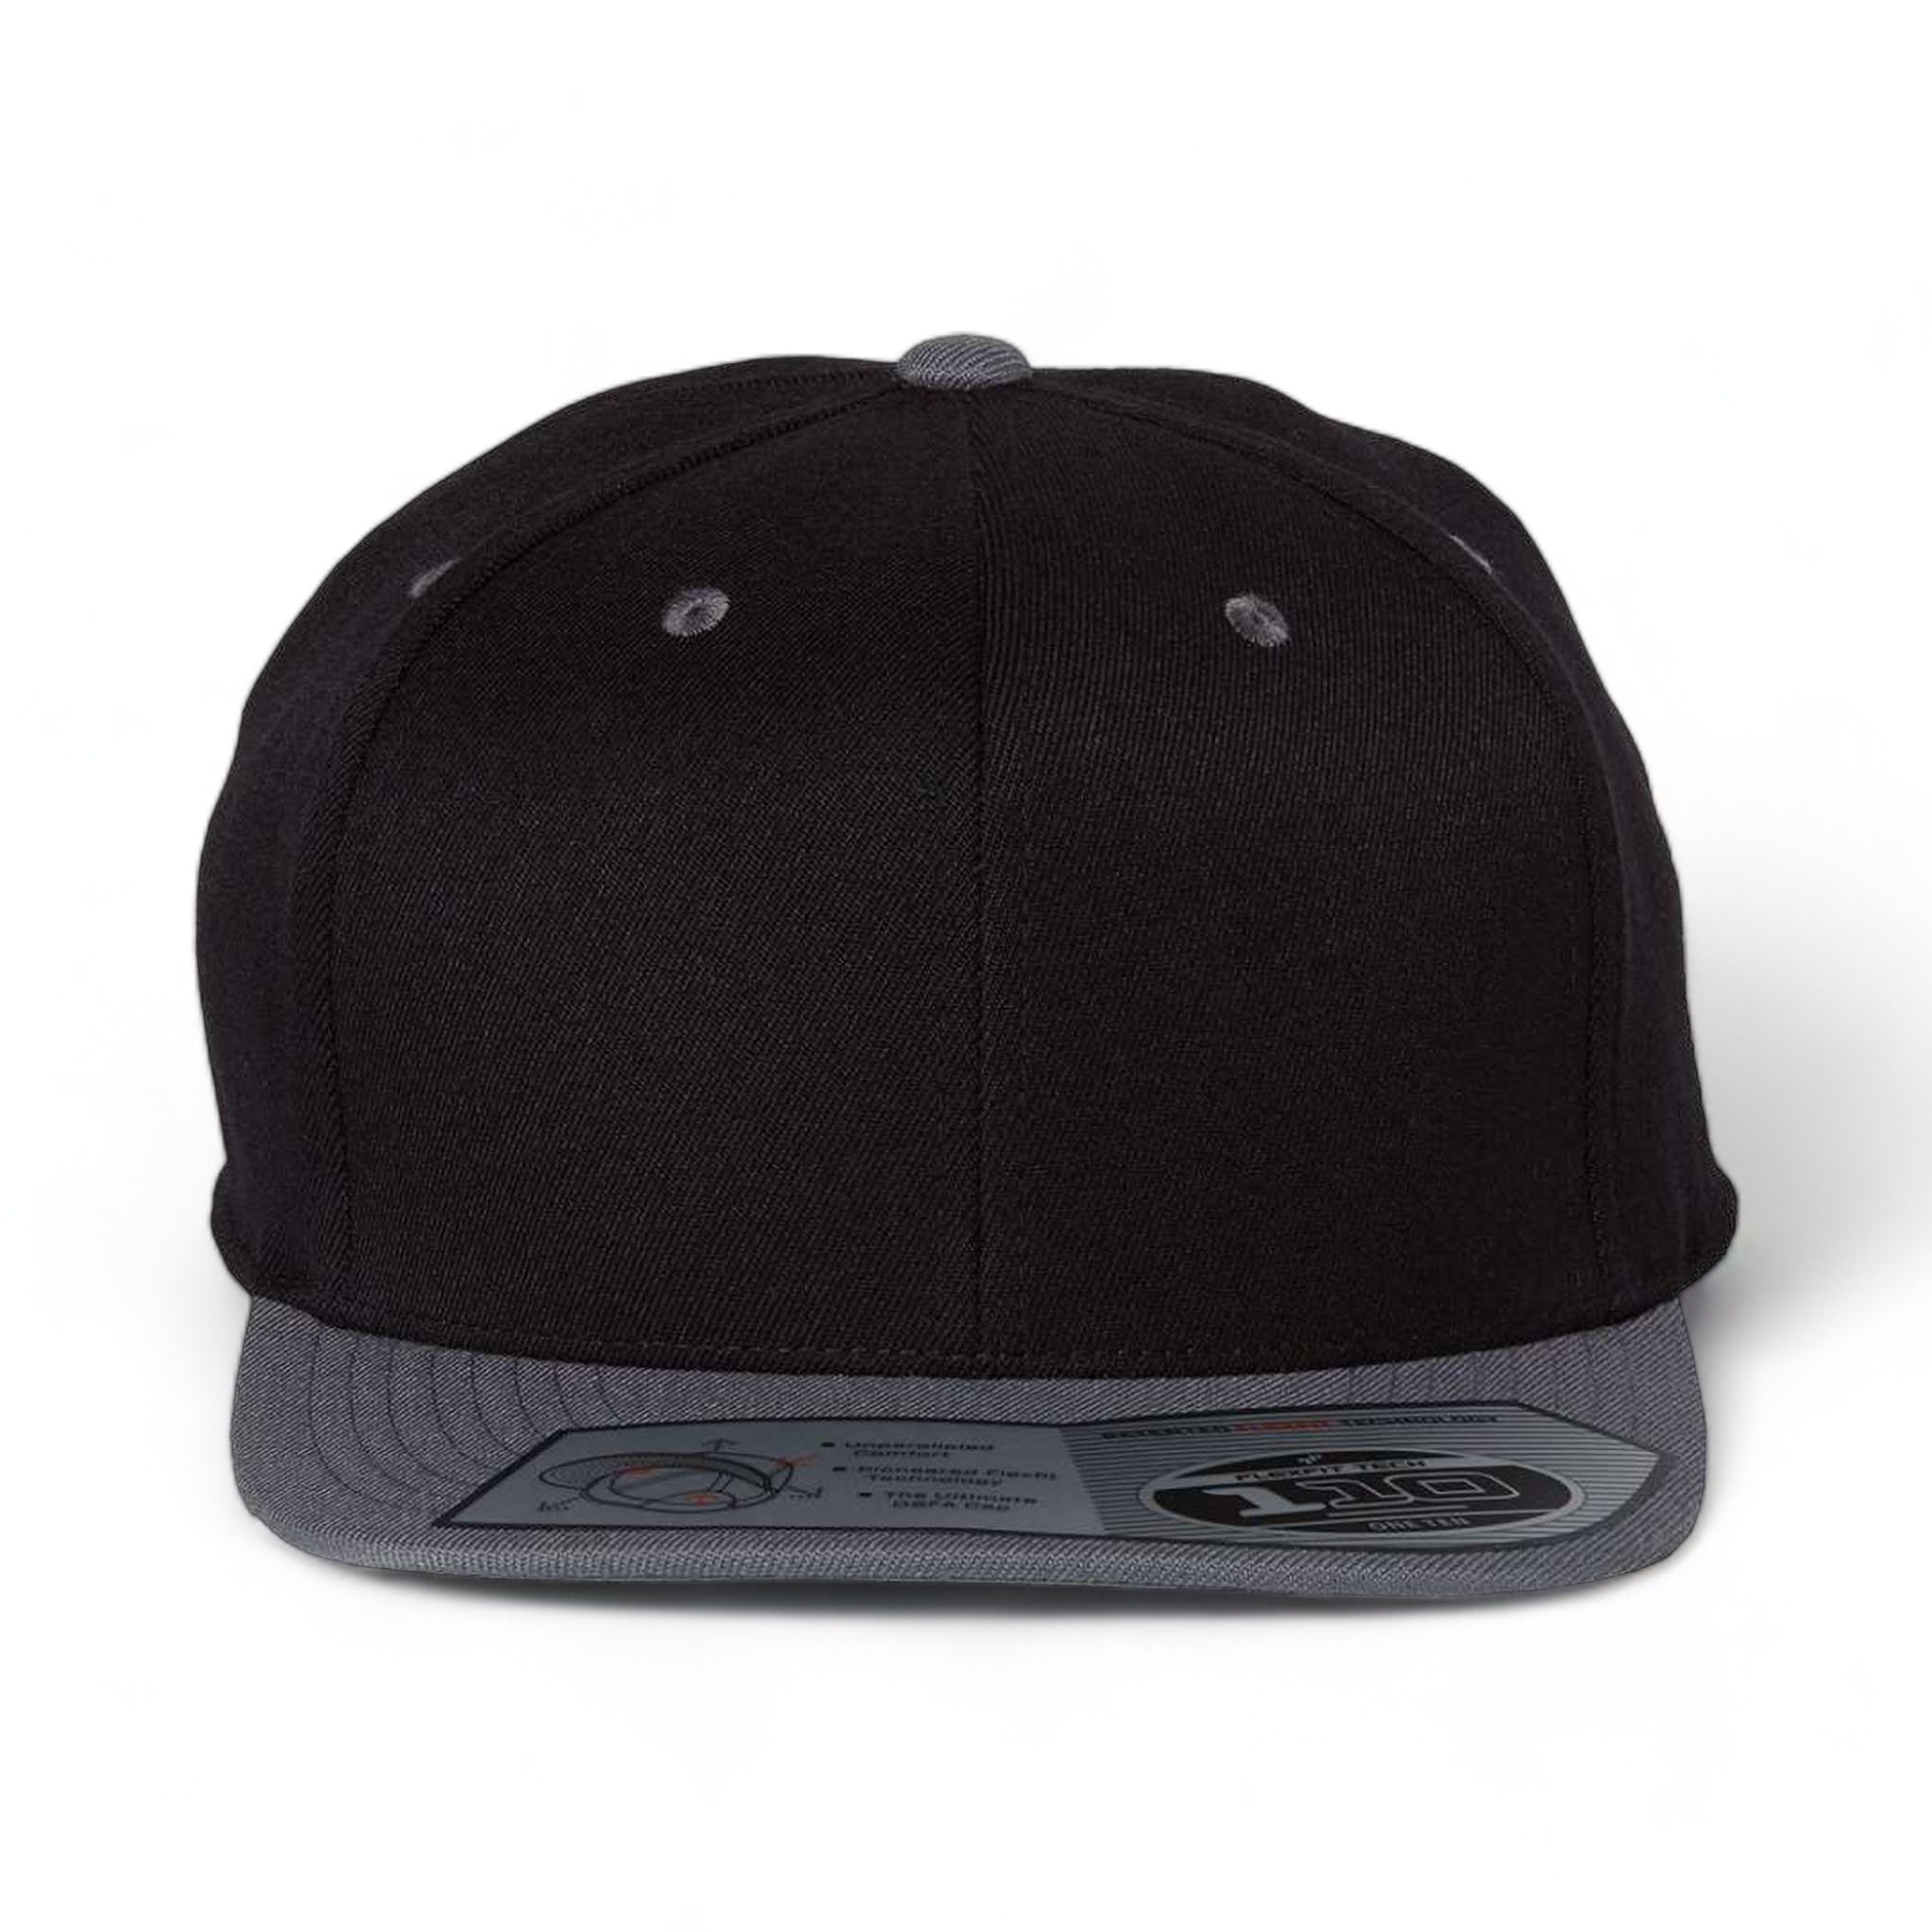 Front view of Flexfit 110F custom hat in black and grey